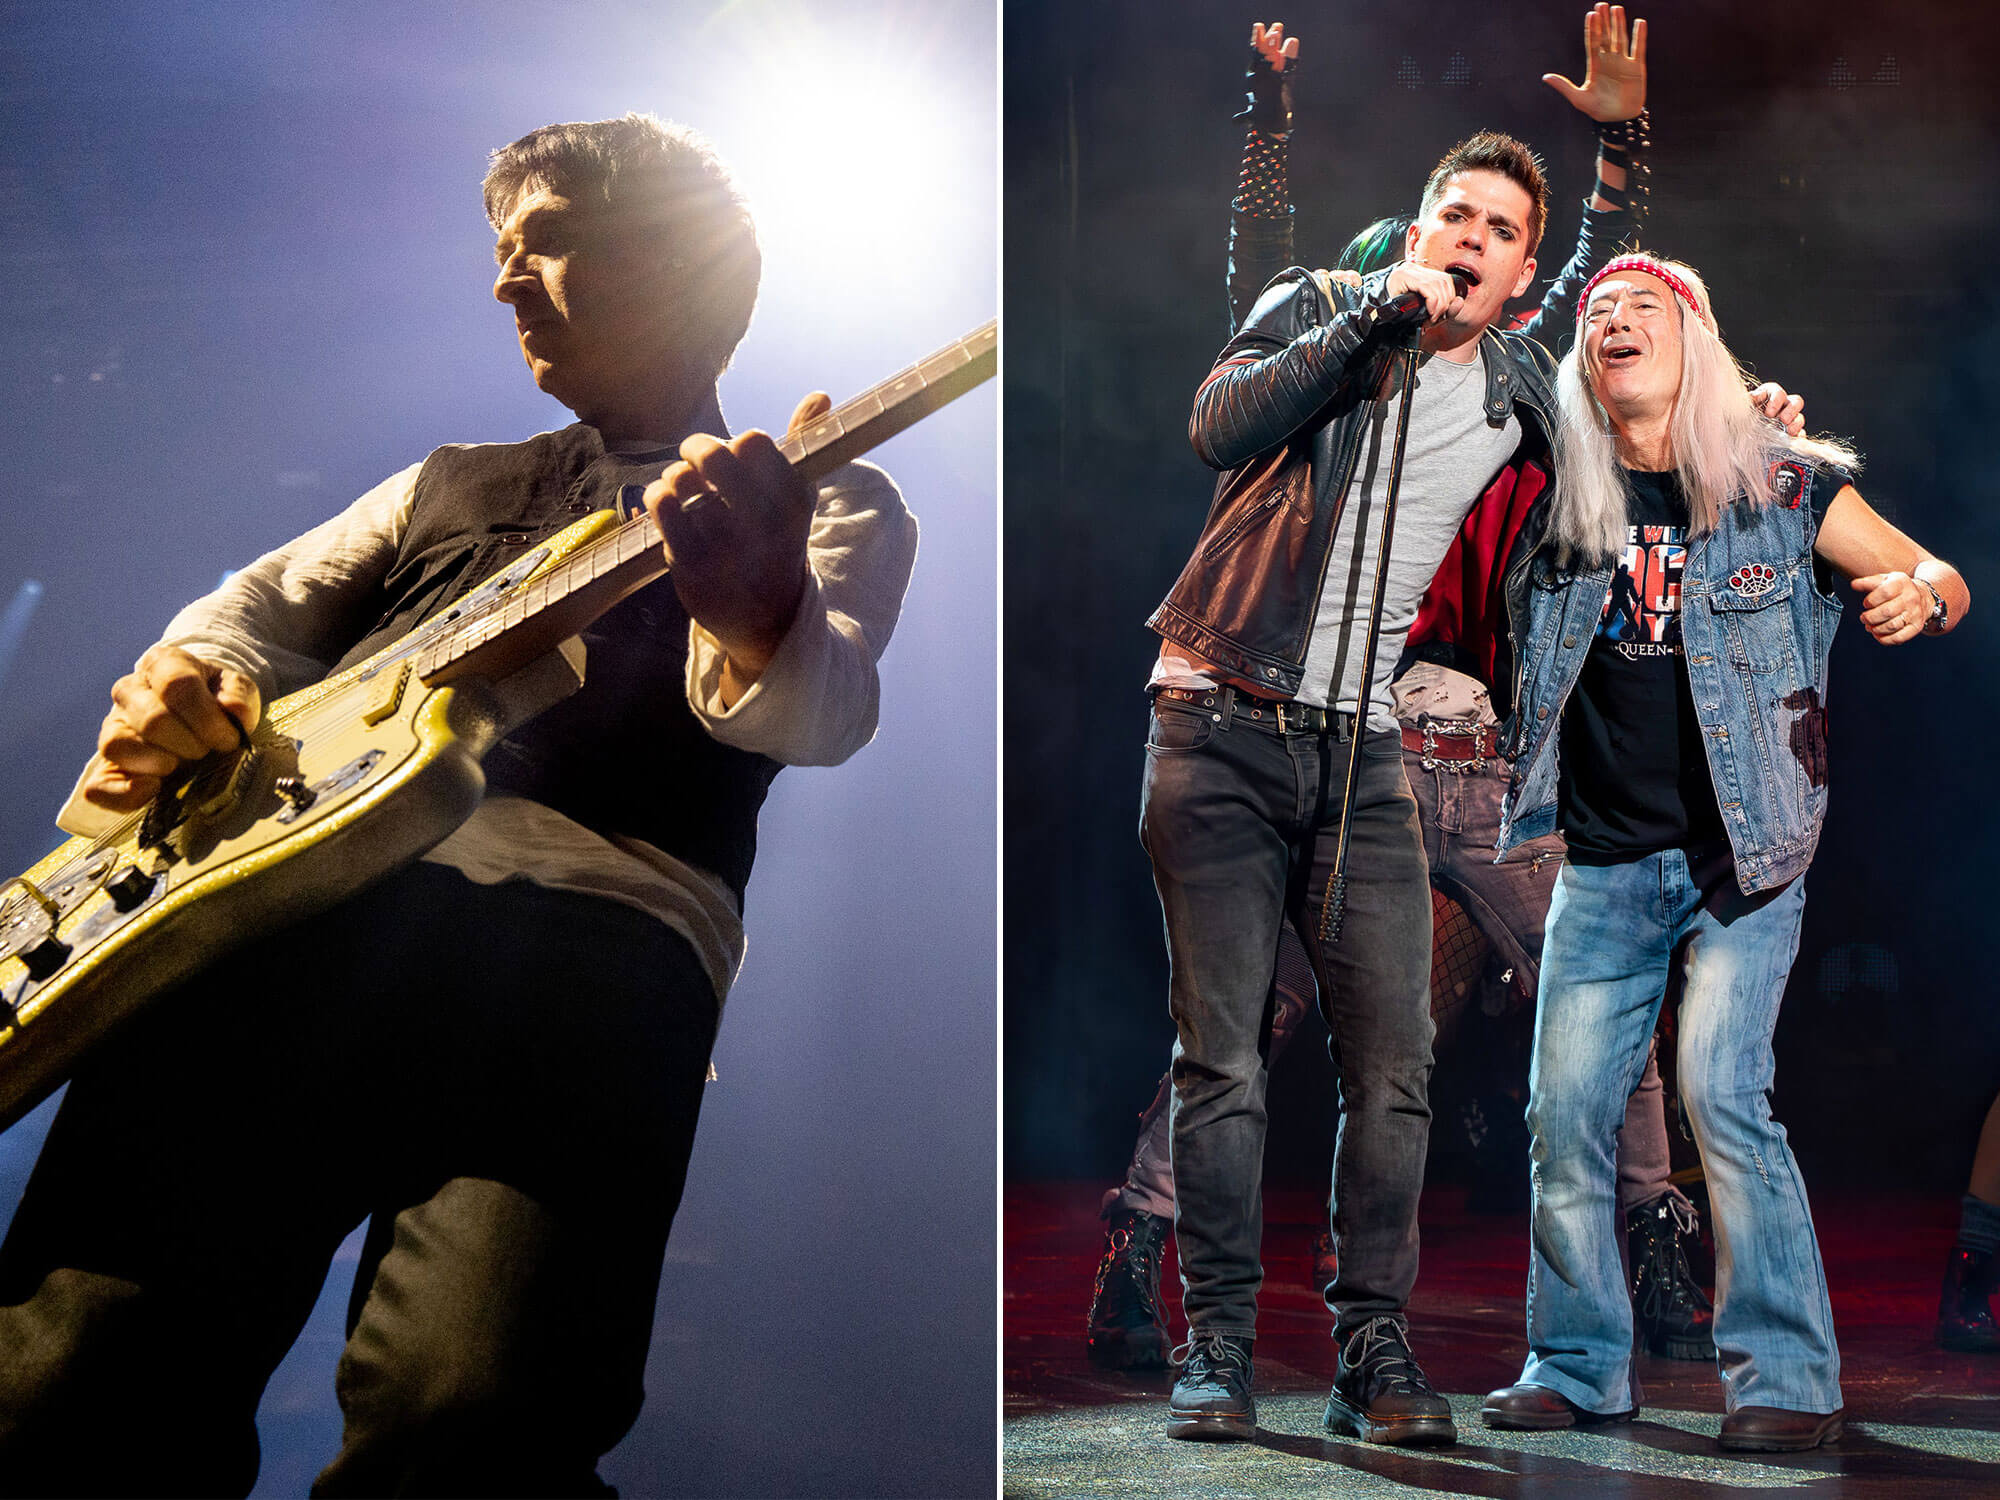 [L-R] Johnny Marr and We Will Rock You the musical